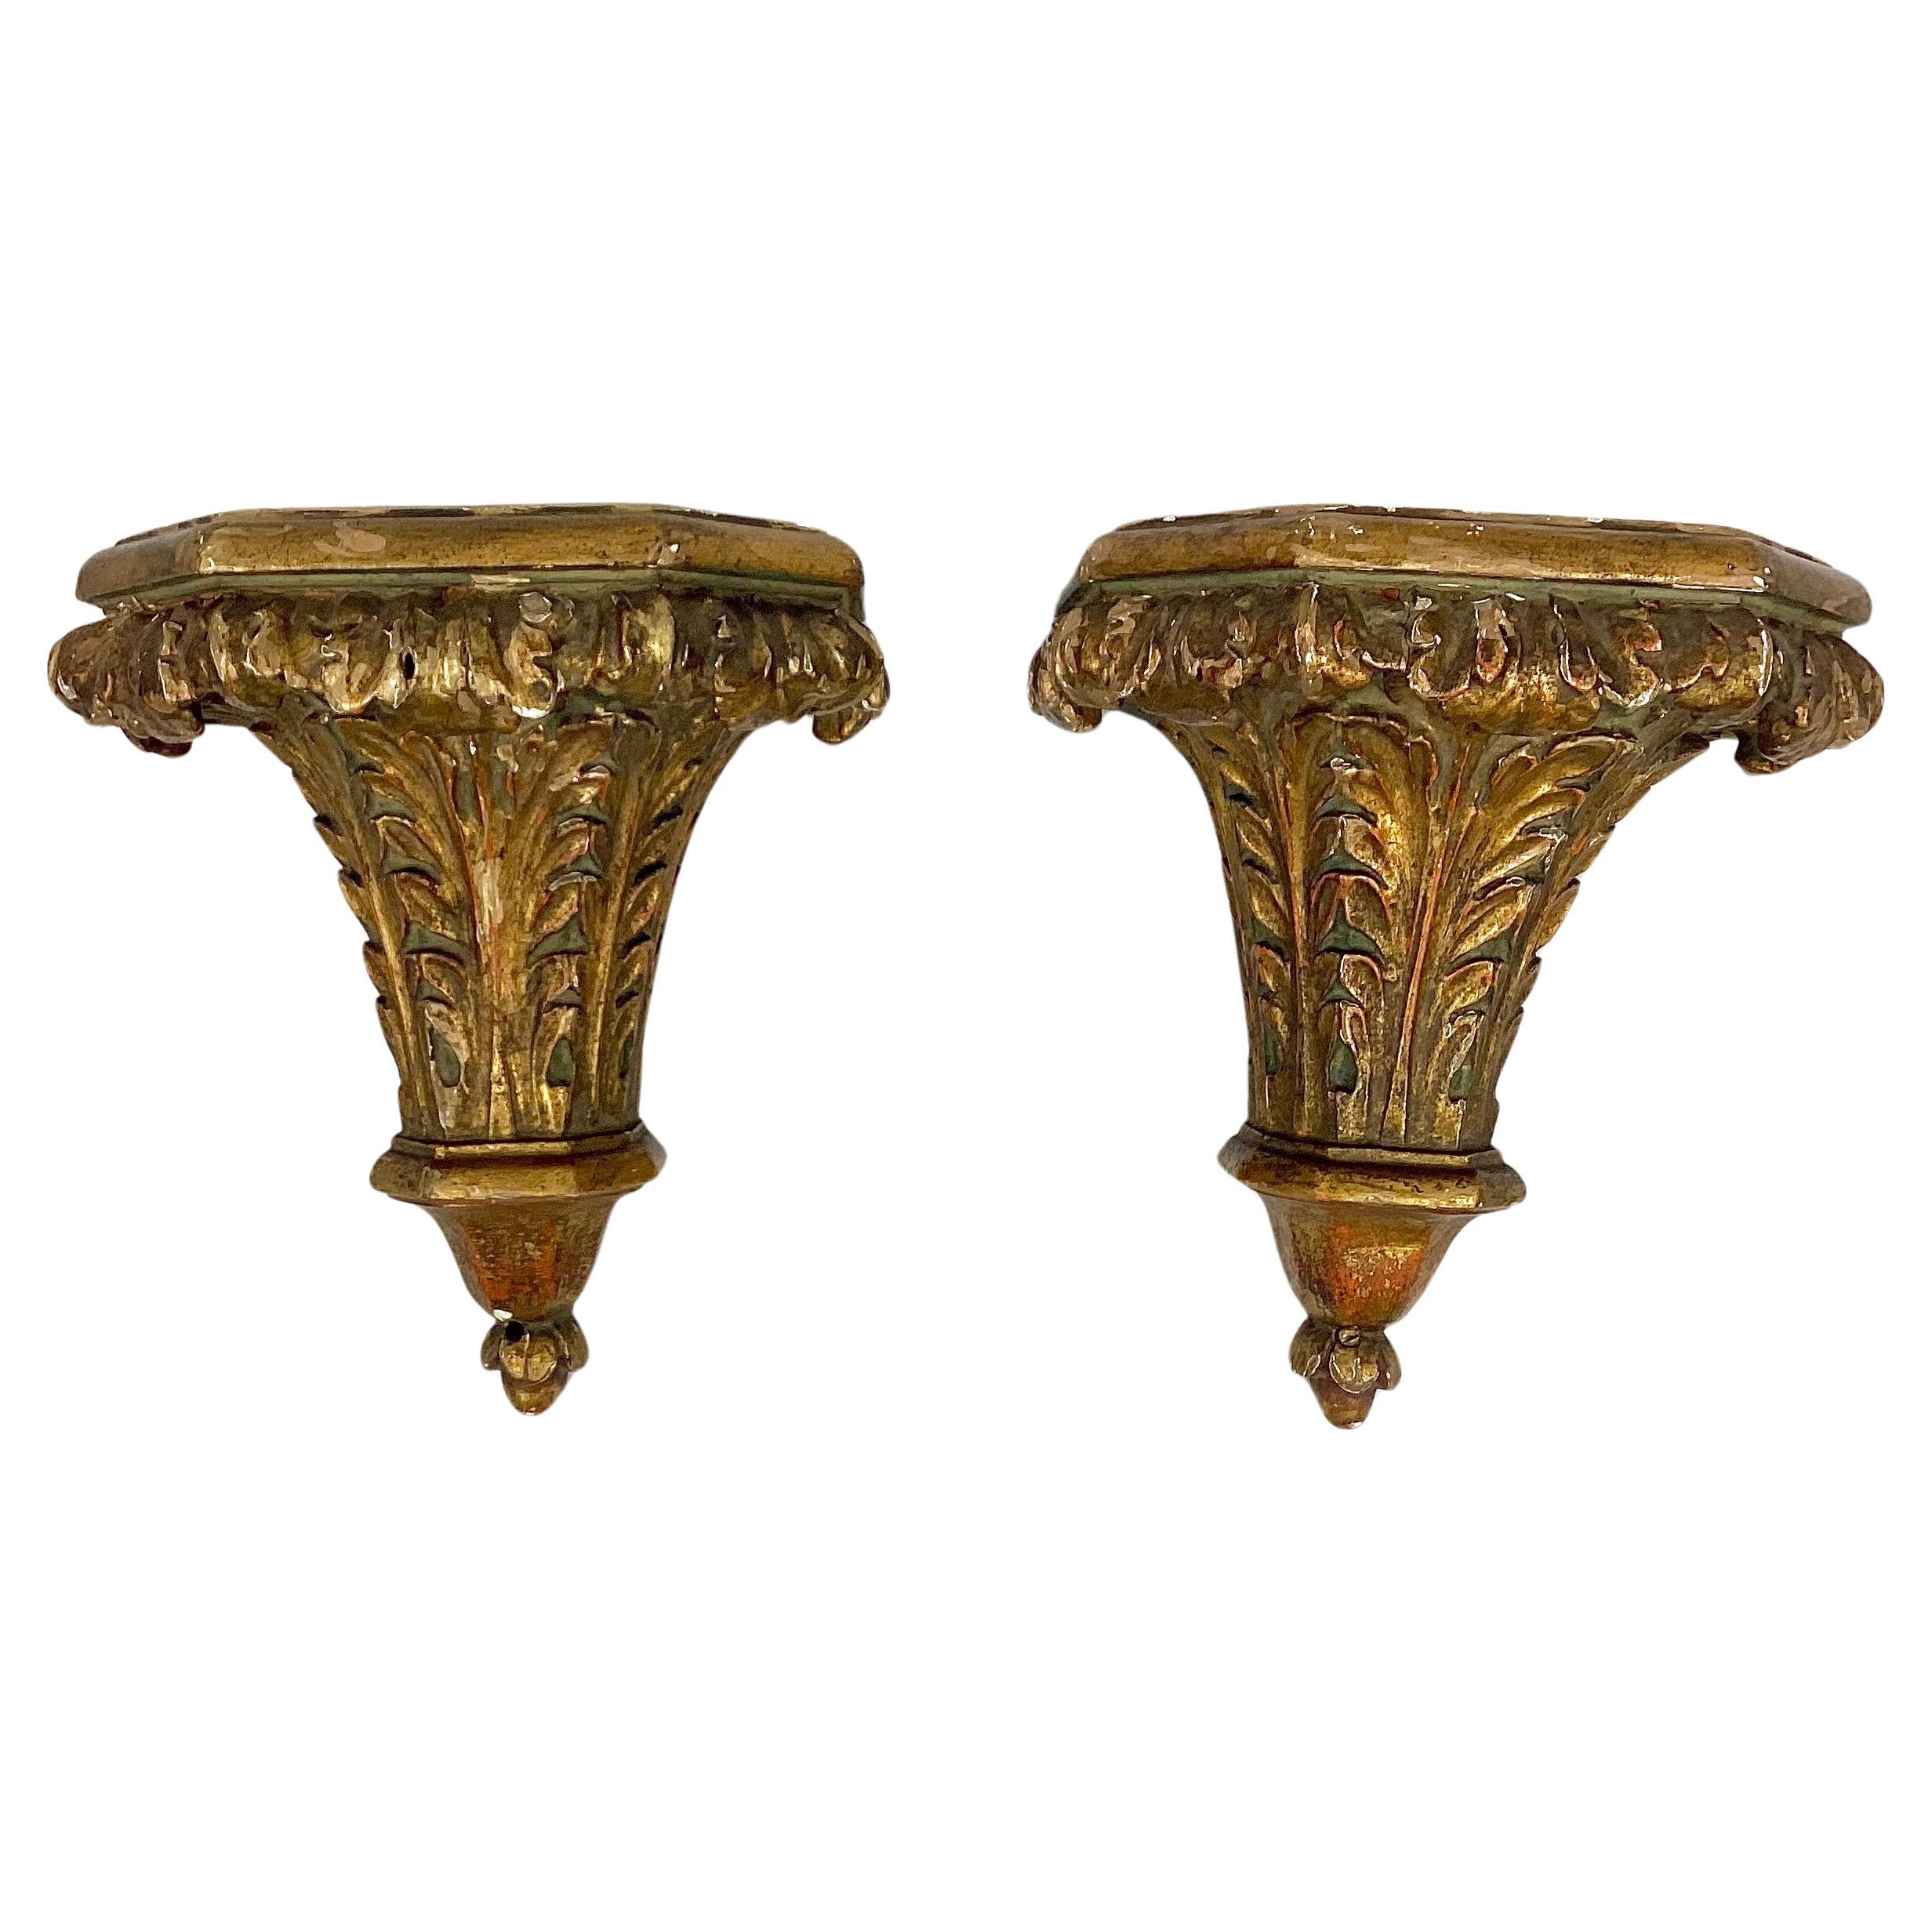 Pair of 19th century Italian gilt wall brackets. Brackets have beautifully carved and painted acanthus leaves topped with a flat shelf. Wonderful old patina. Brass hardware is affixed to back for hanging. 